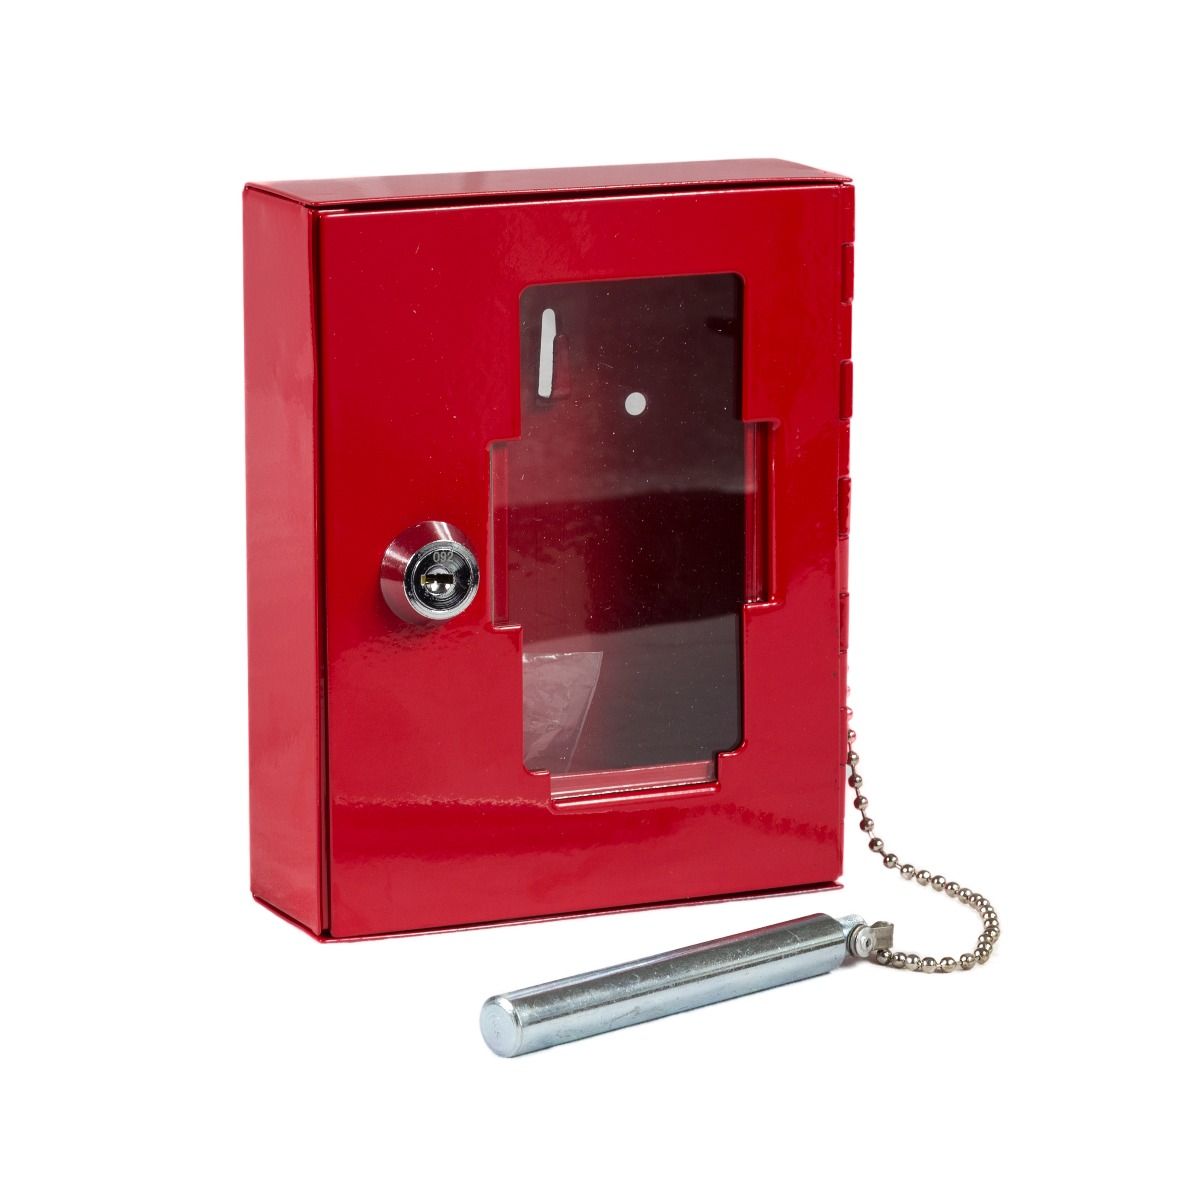 637393031521589998_emergency_key_boxes_with_hammer_and_chain_1_hook_15_x_12.5_x_3cm_closed.jpg